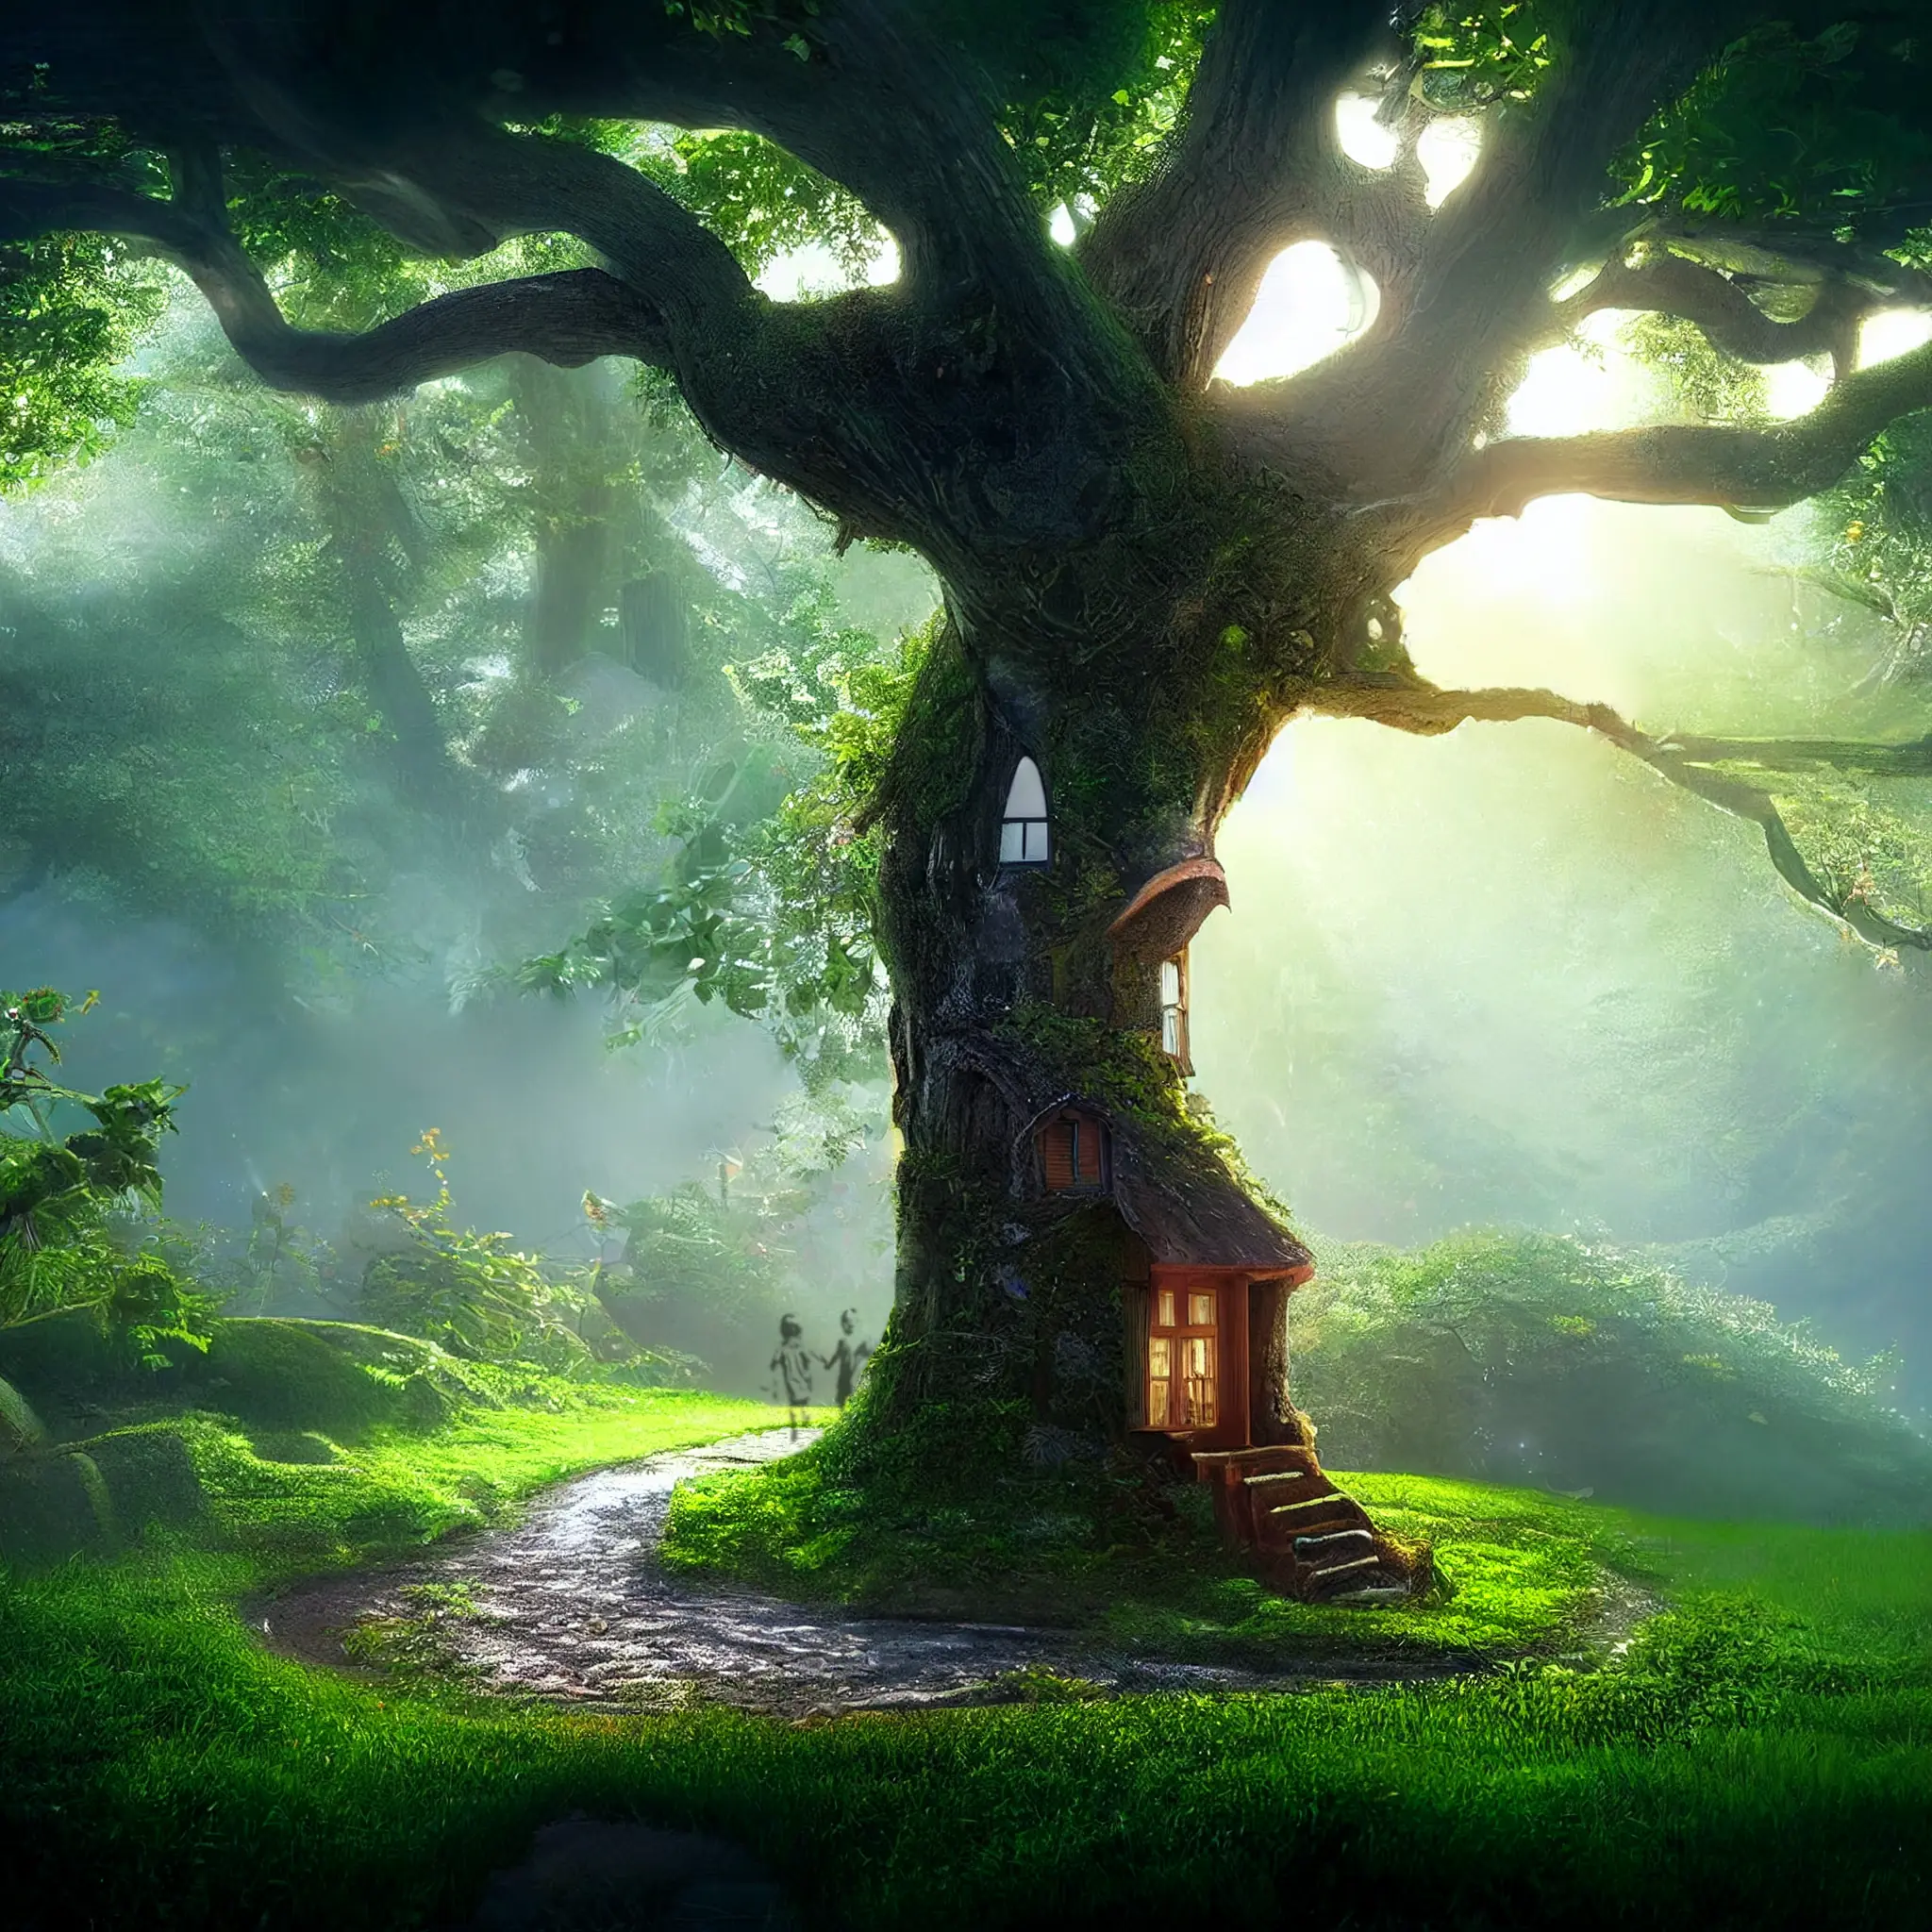 An artistic rendering of a home that has grown into the trunk of a tree.